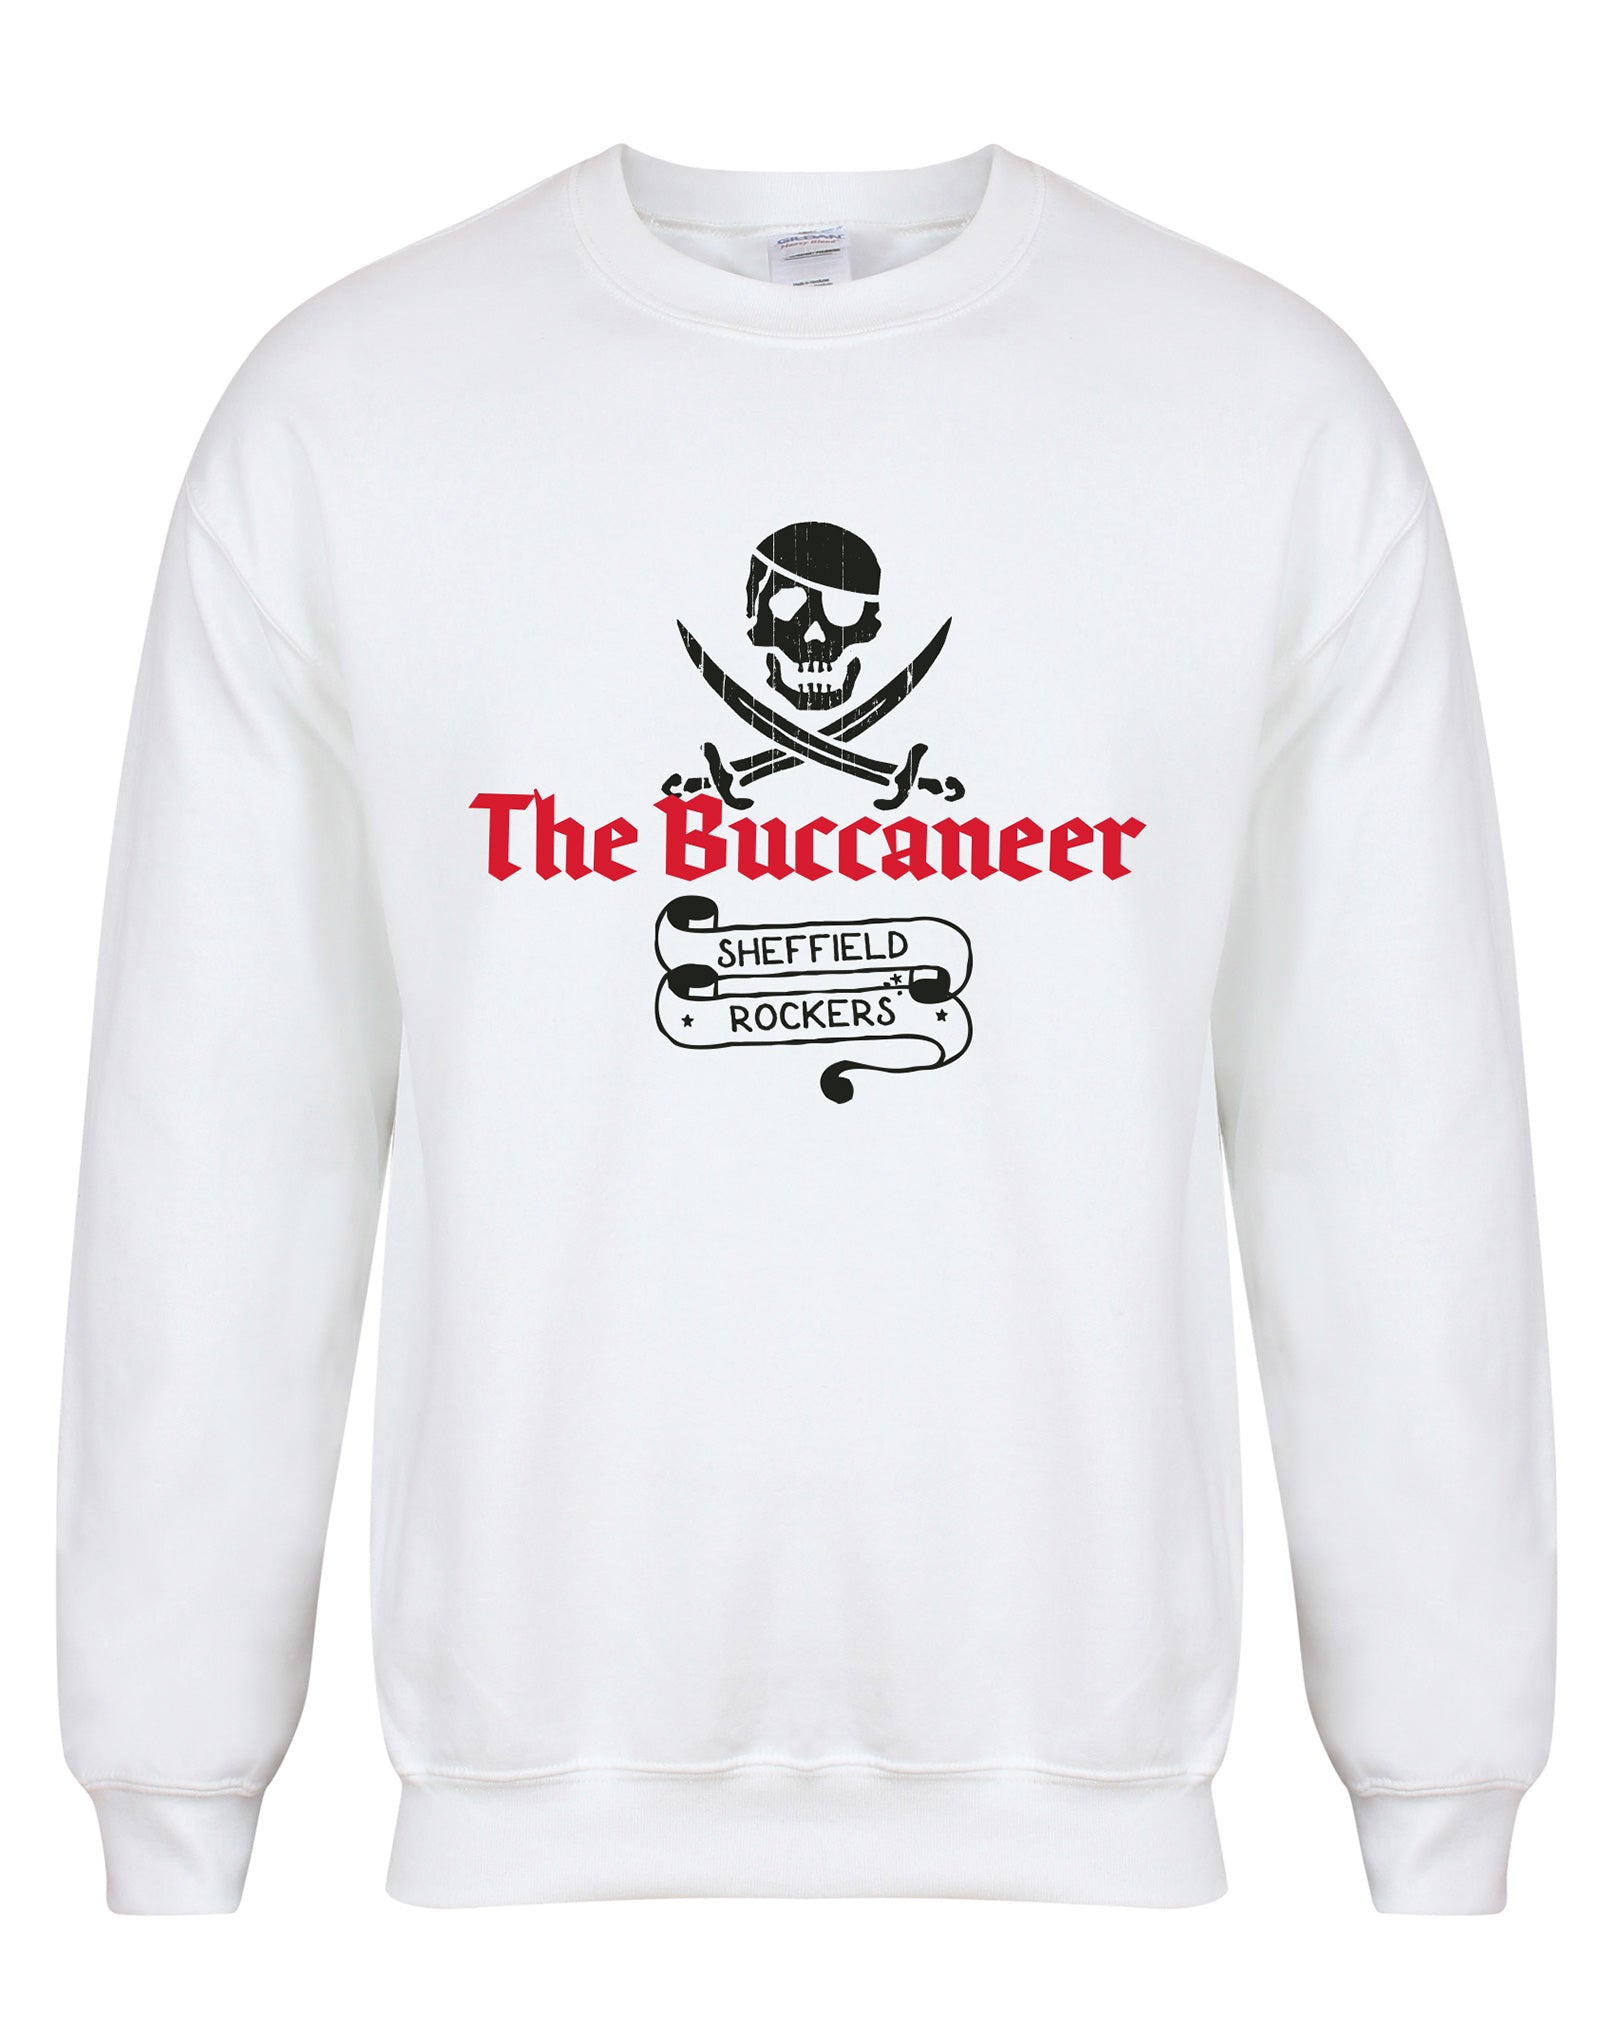 Buccaneer unisex fit sweatshirt - various colours - Dirty Stop Outs